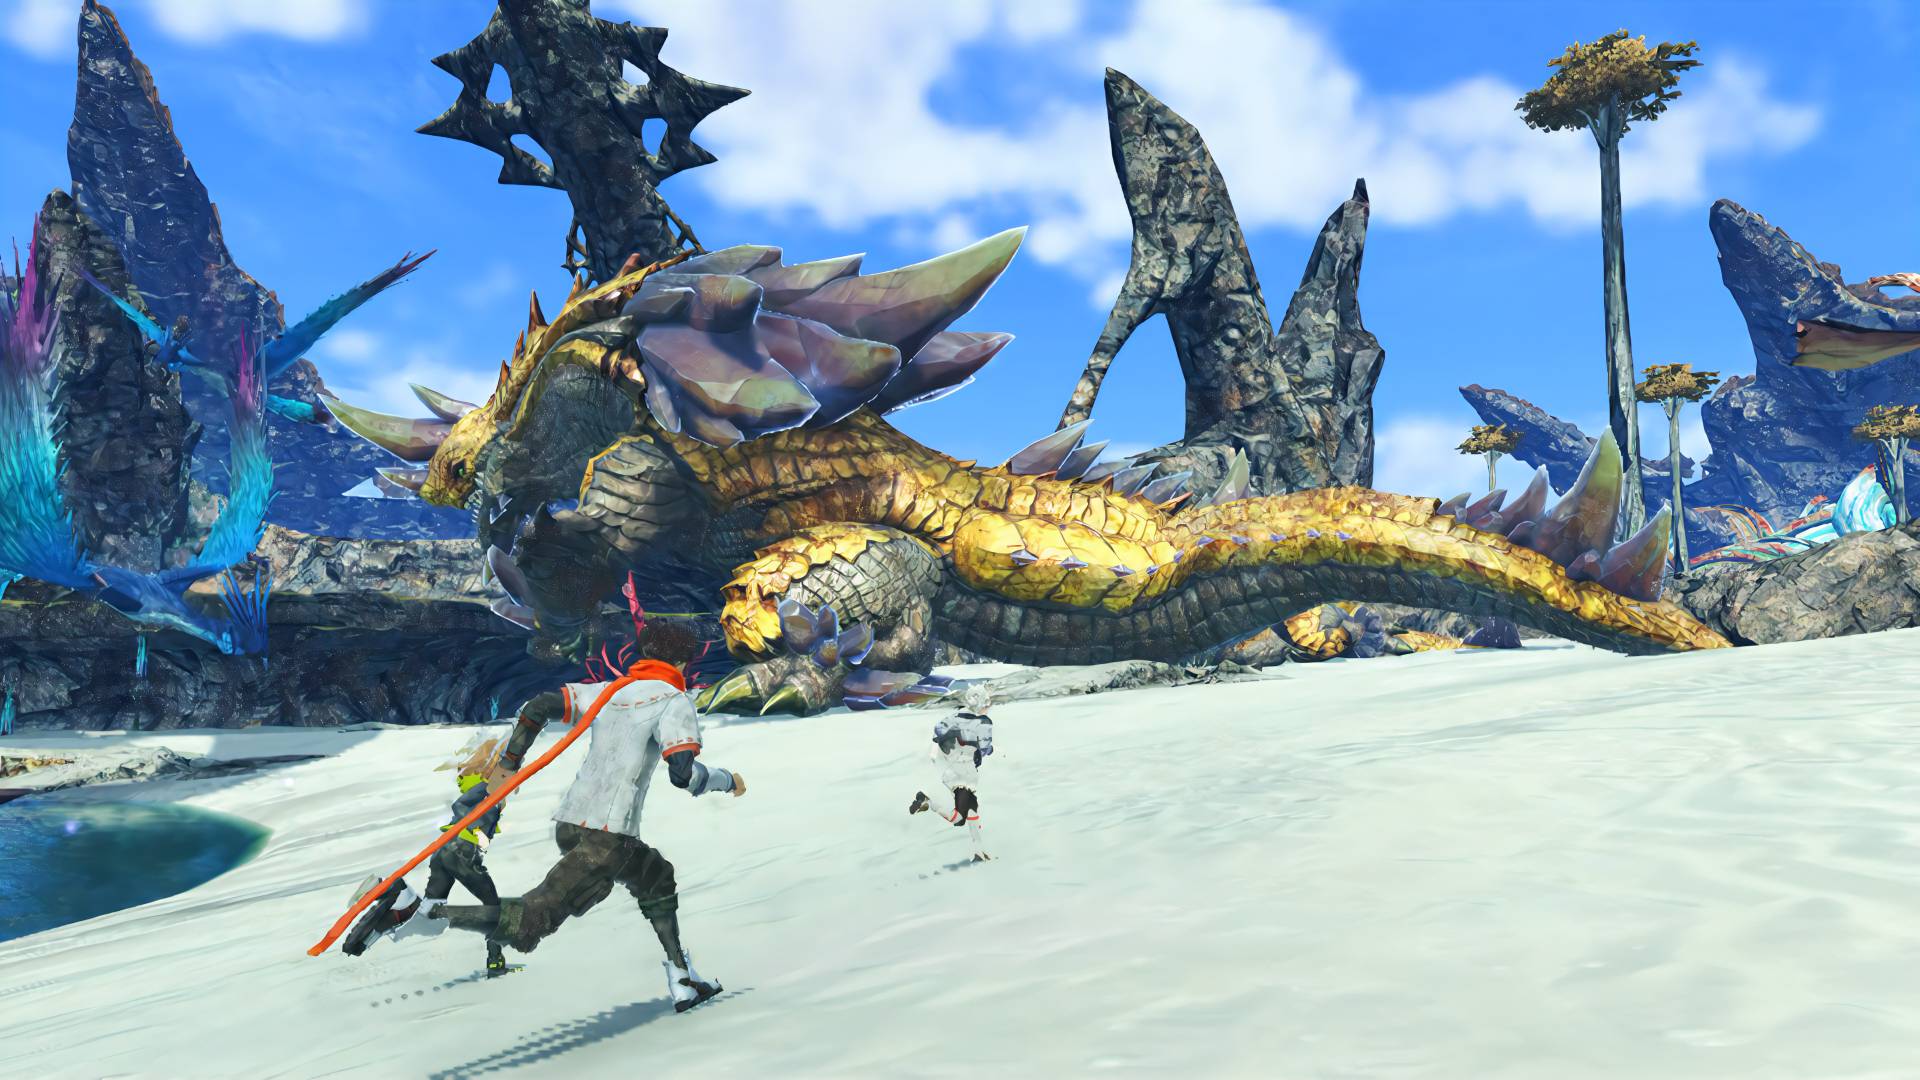 Best Switch games: a screenshot from the RPG Xenoblade Chronicles 3 shows three young JRPG protagonists running along a sandy beach. In the background, a hulking monster with large horns and scales wanders by